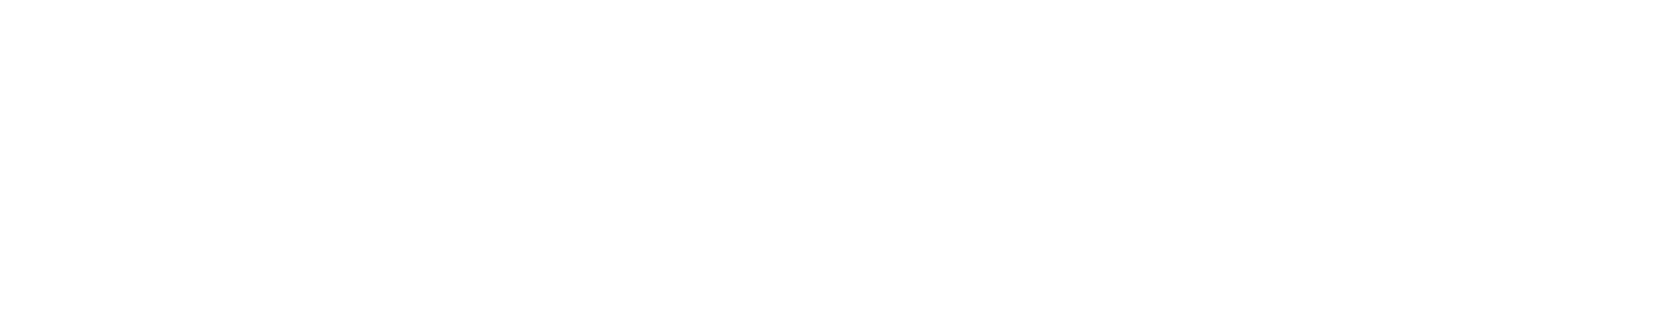 Lyndsey Roofing®